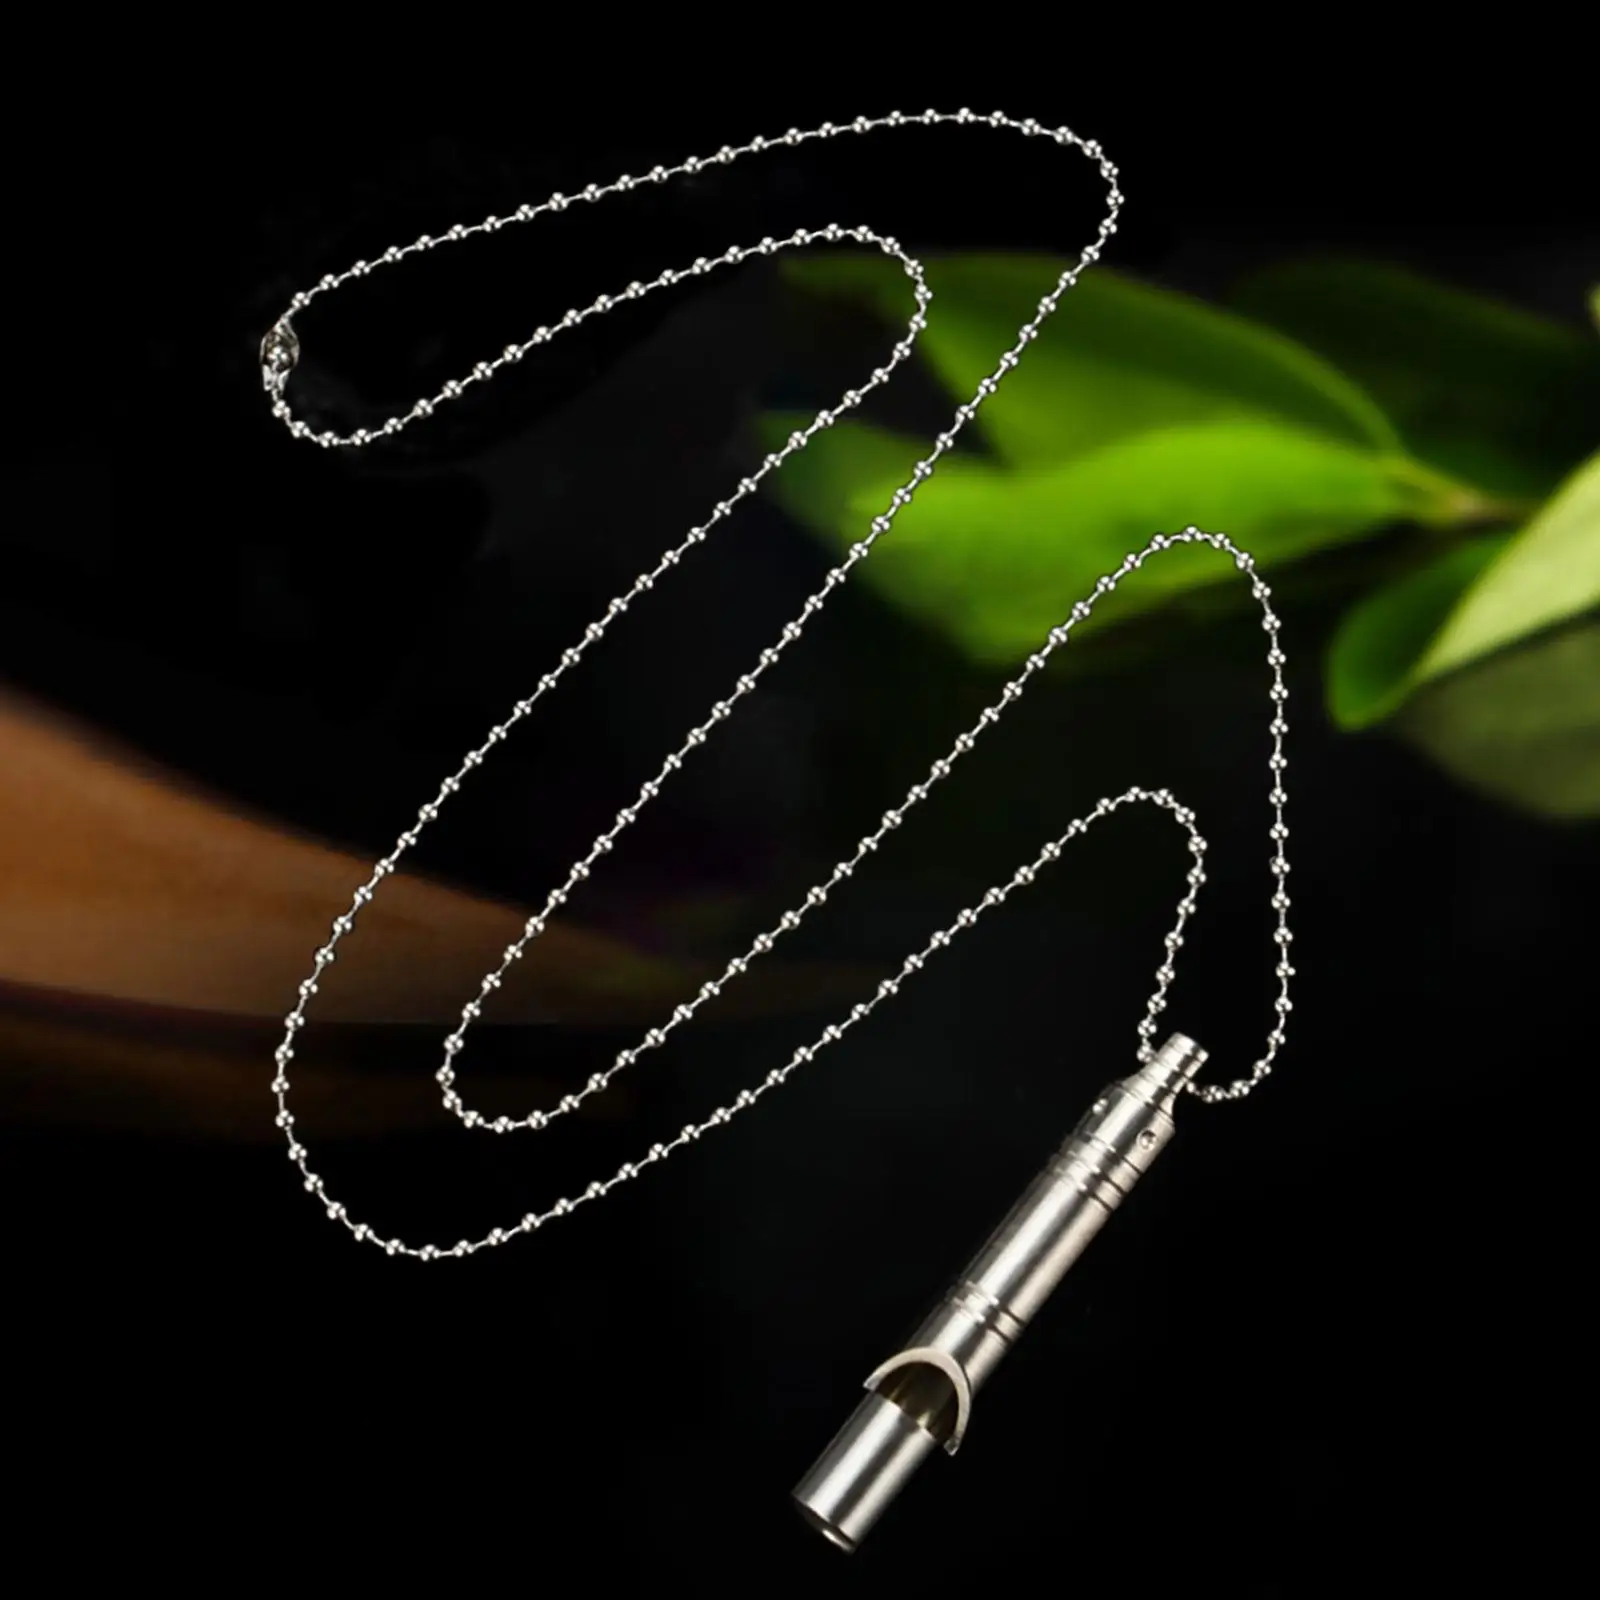 Camping Survival Whistles Necklace Stainless Steel Chain Outdoor Necklace